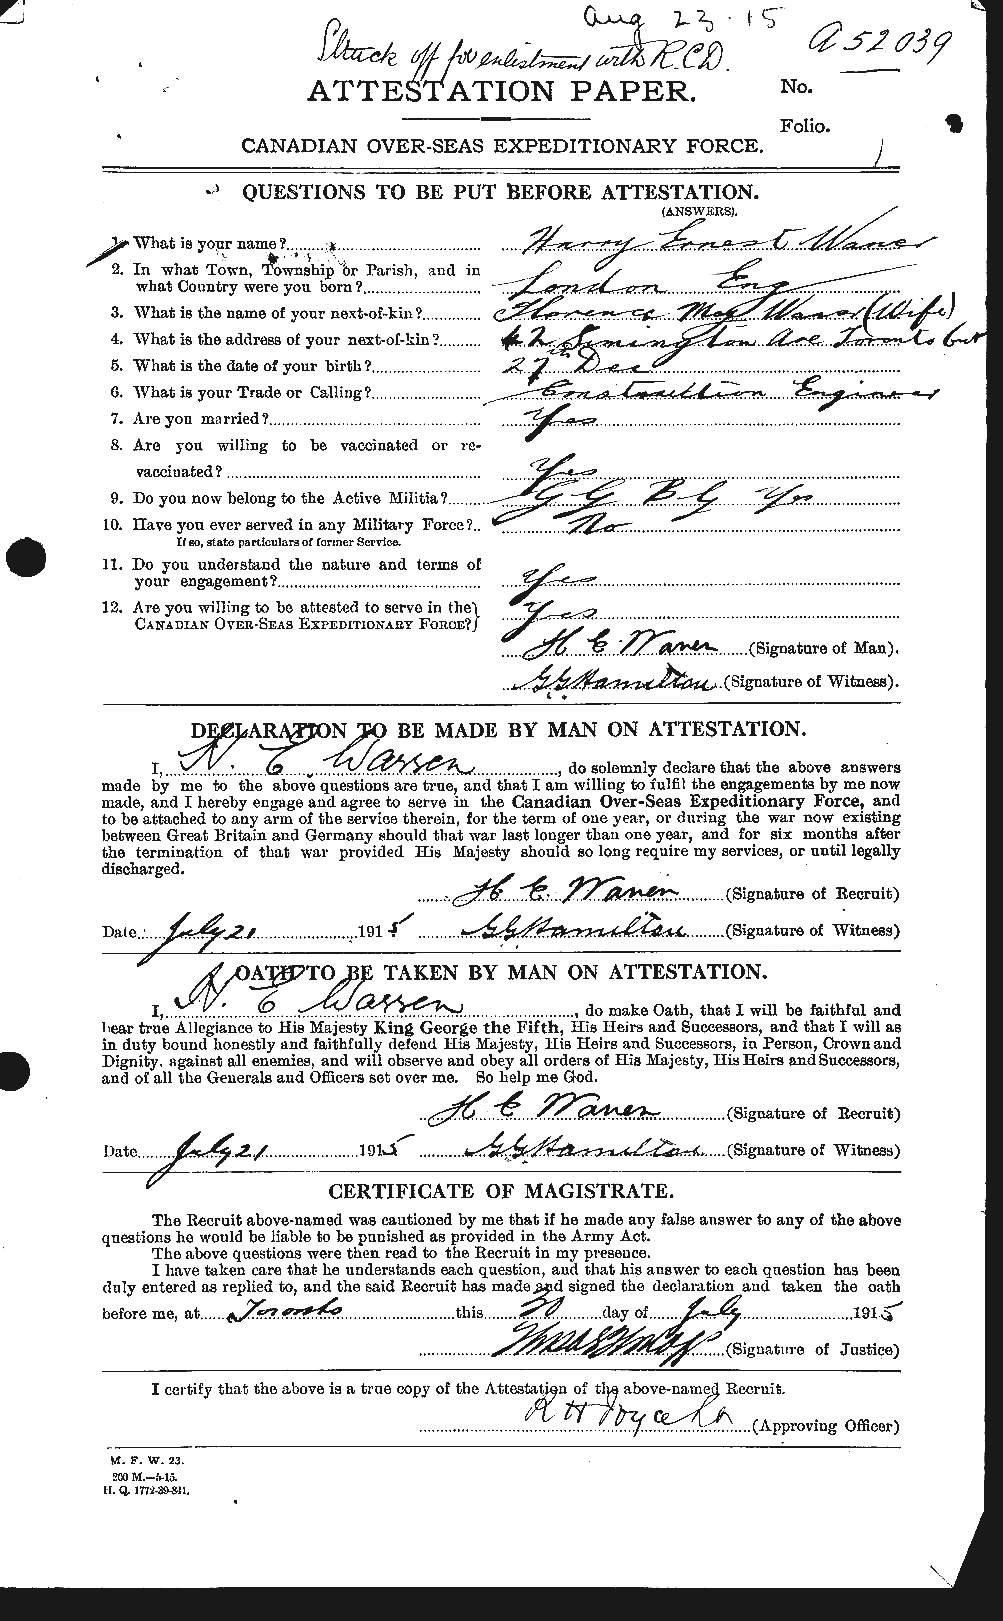 Personnel Records of the First World War - CEF 658487a